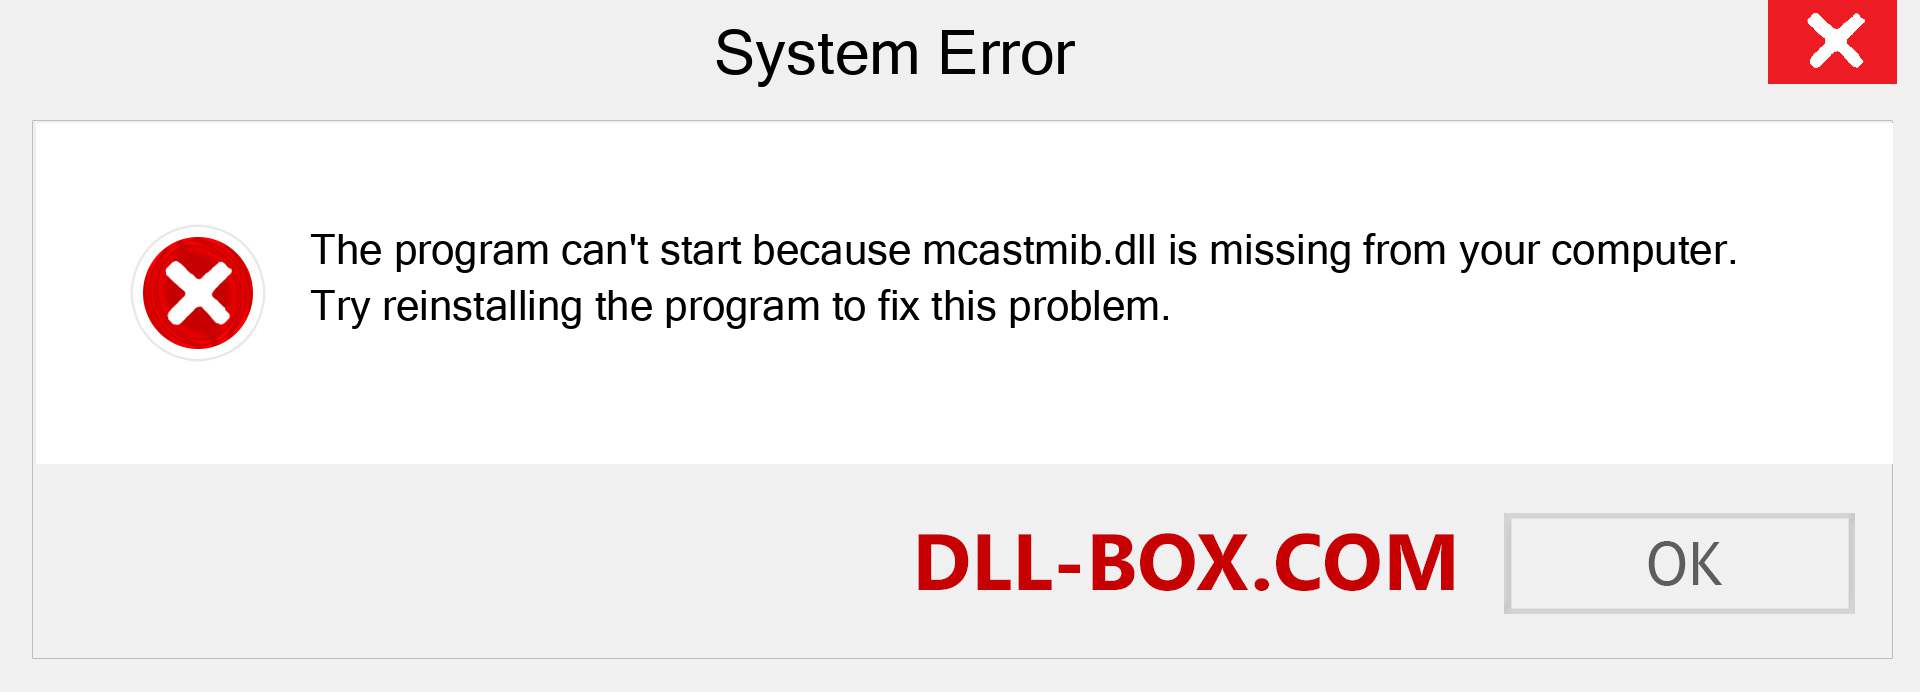  mcastmib.dll file is missing?. Download for Windows 7, 8, 10 - Fix  mcastmib dll Missing Error on Windows, photos, images